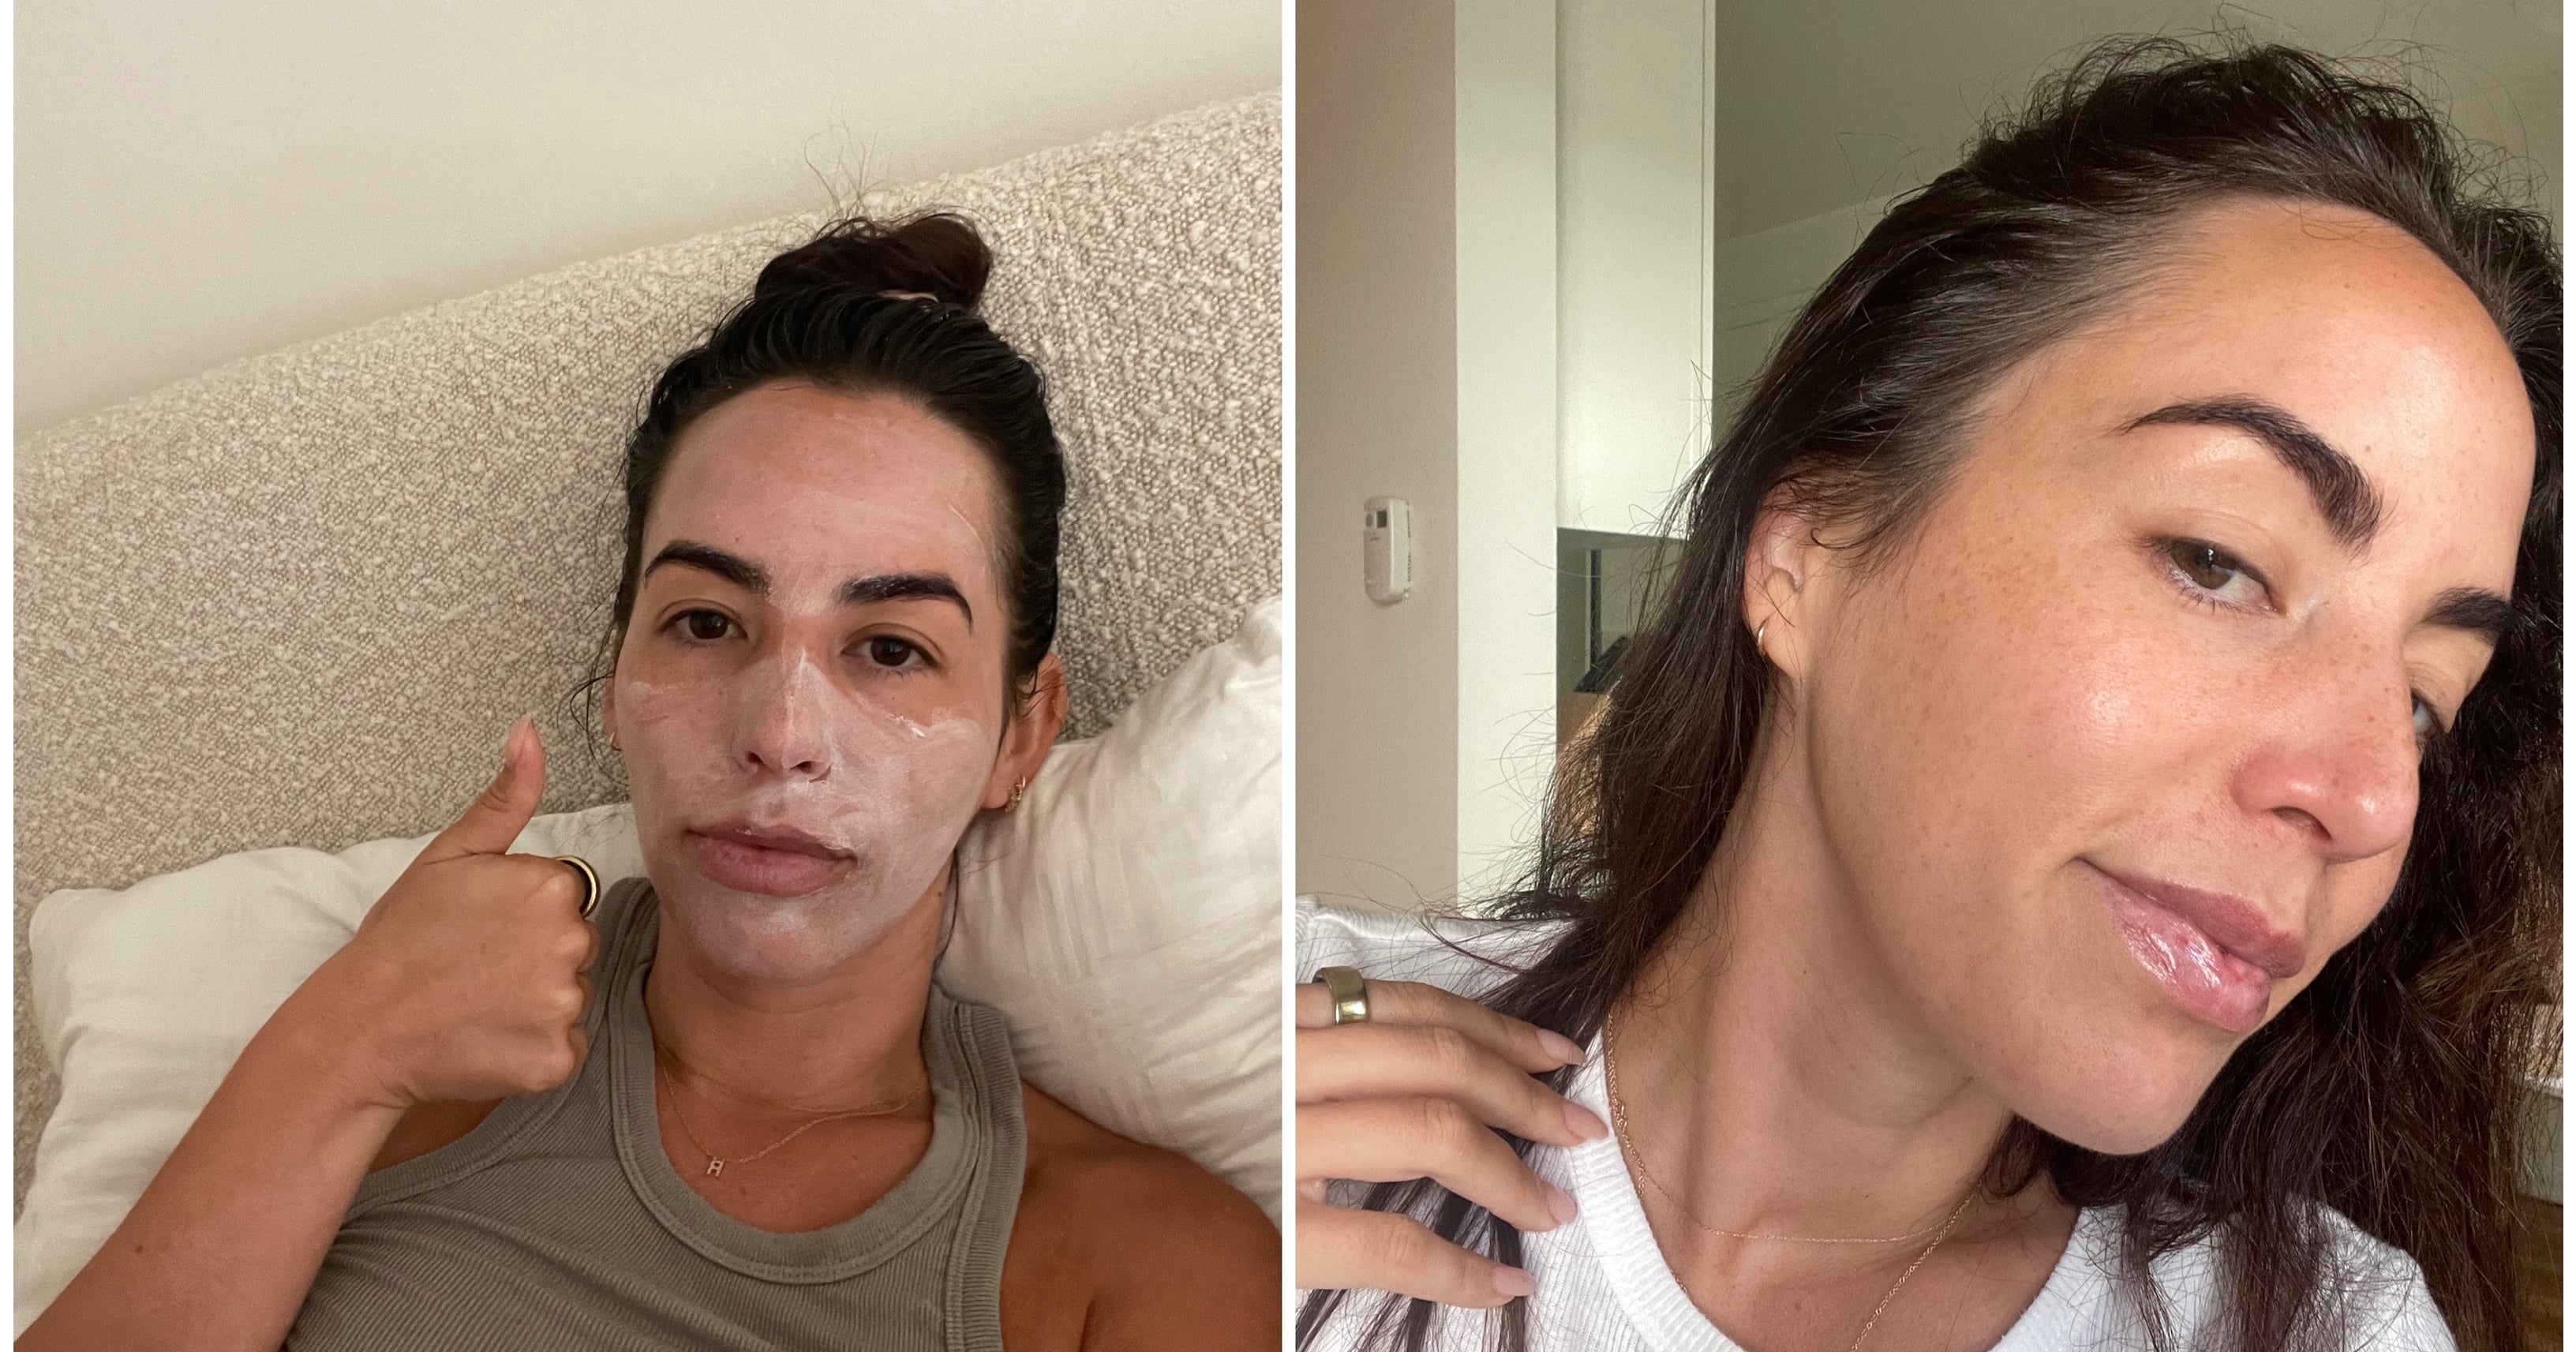 I Have Sensitive Skin, and “Face Basting” Was a Game-Changer